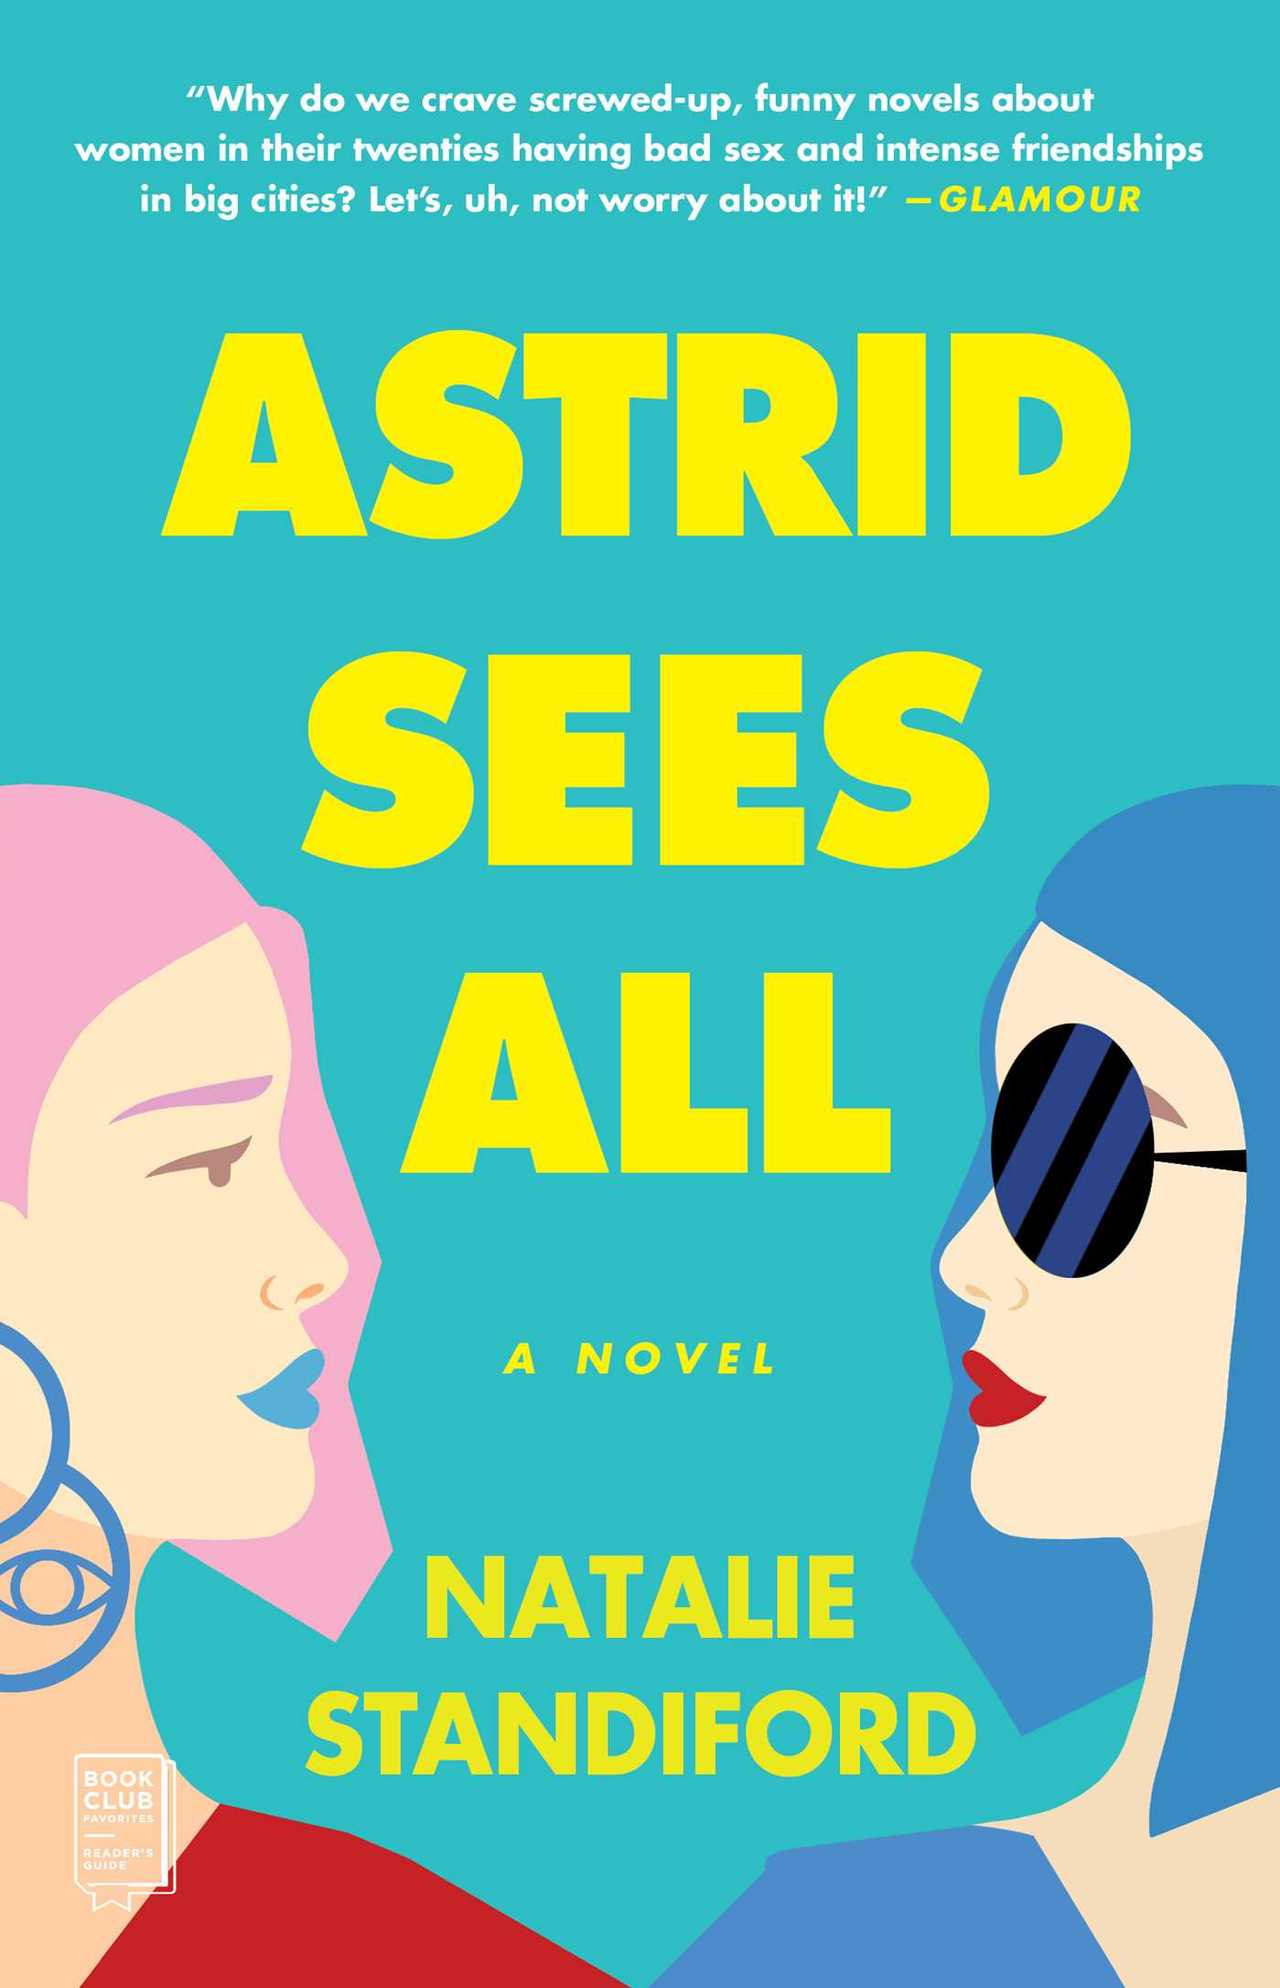 Astrid Sees All: A Novel by Natalie Standiford